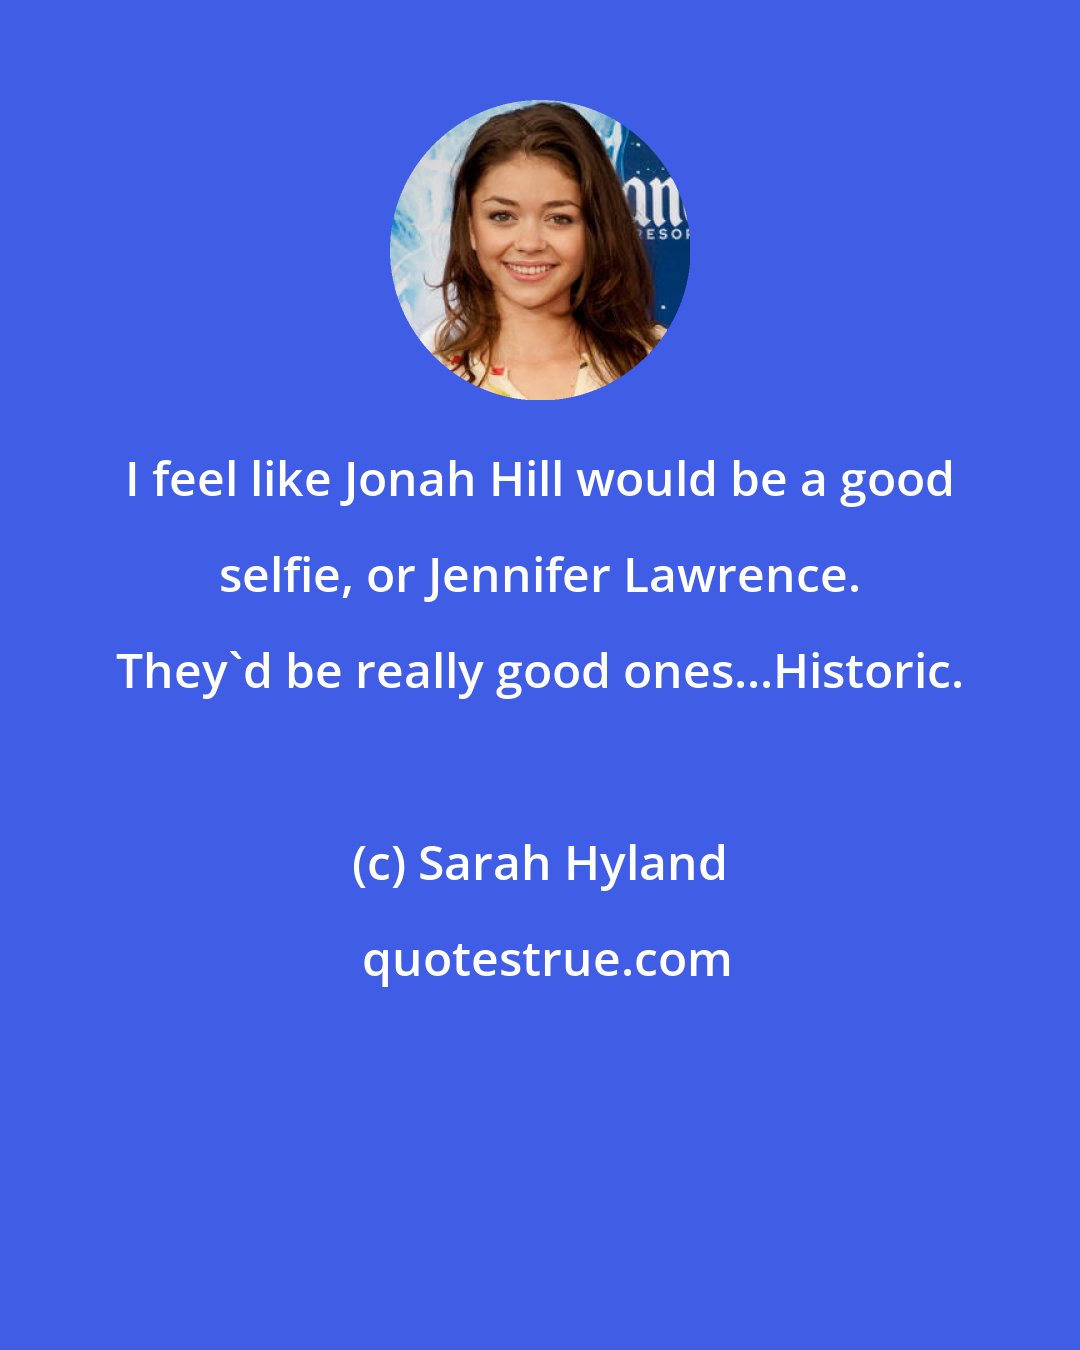 Sarah Hyland: I feel like Jonah Hill would be a good selfie, or Jennifer Lawrence. They'd be really good ones...Historic.